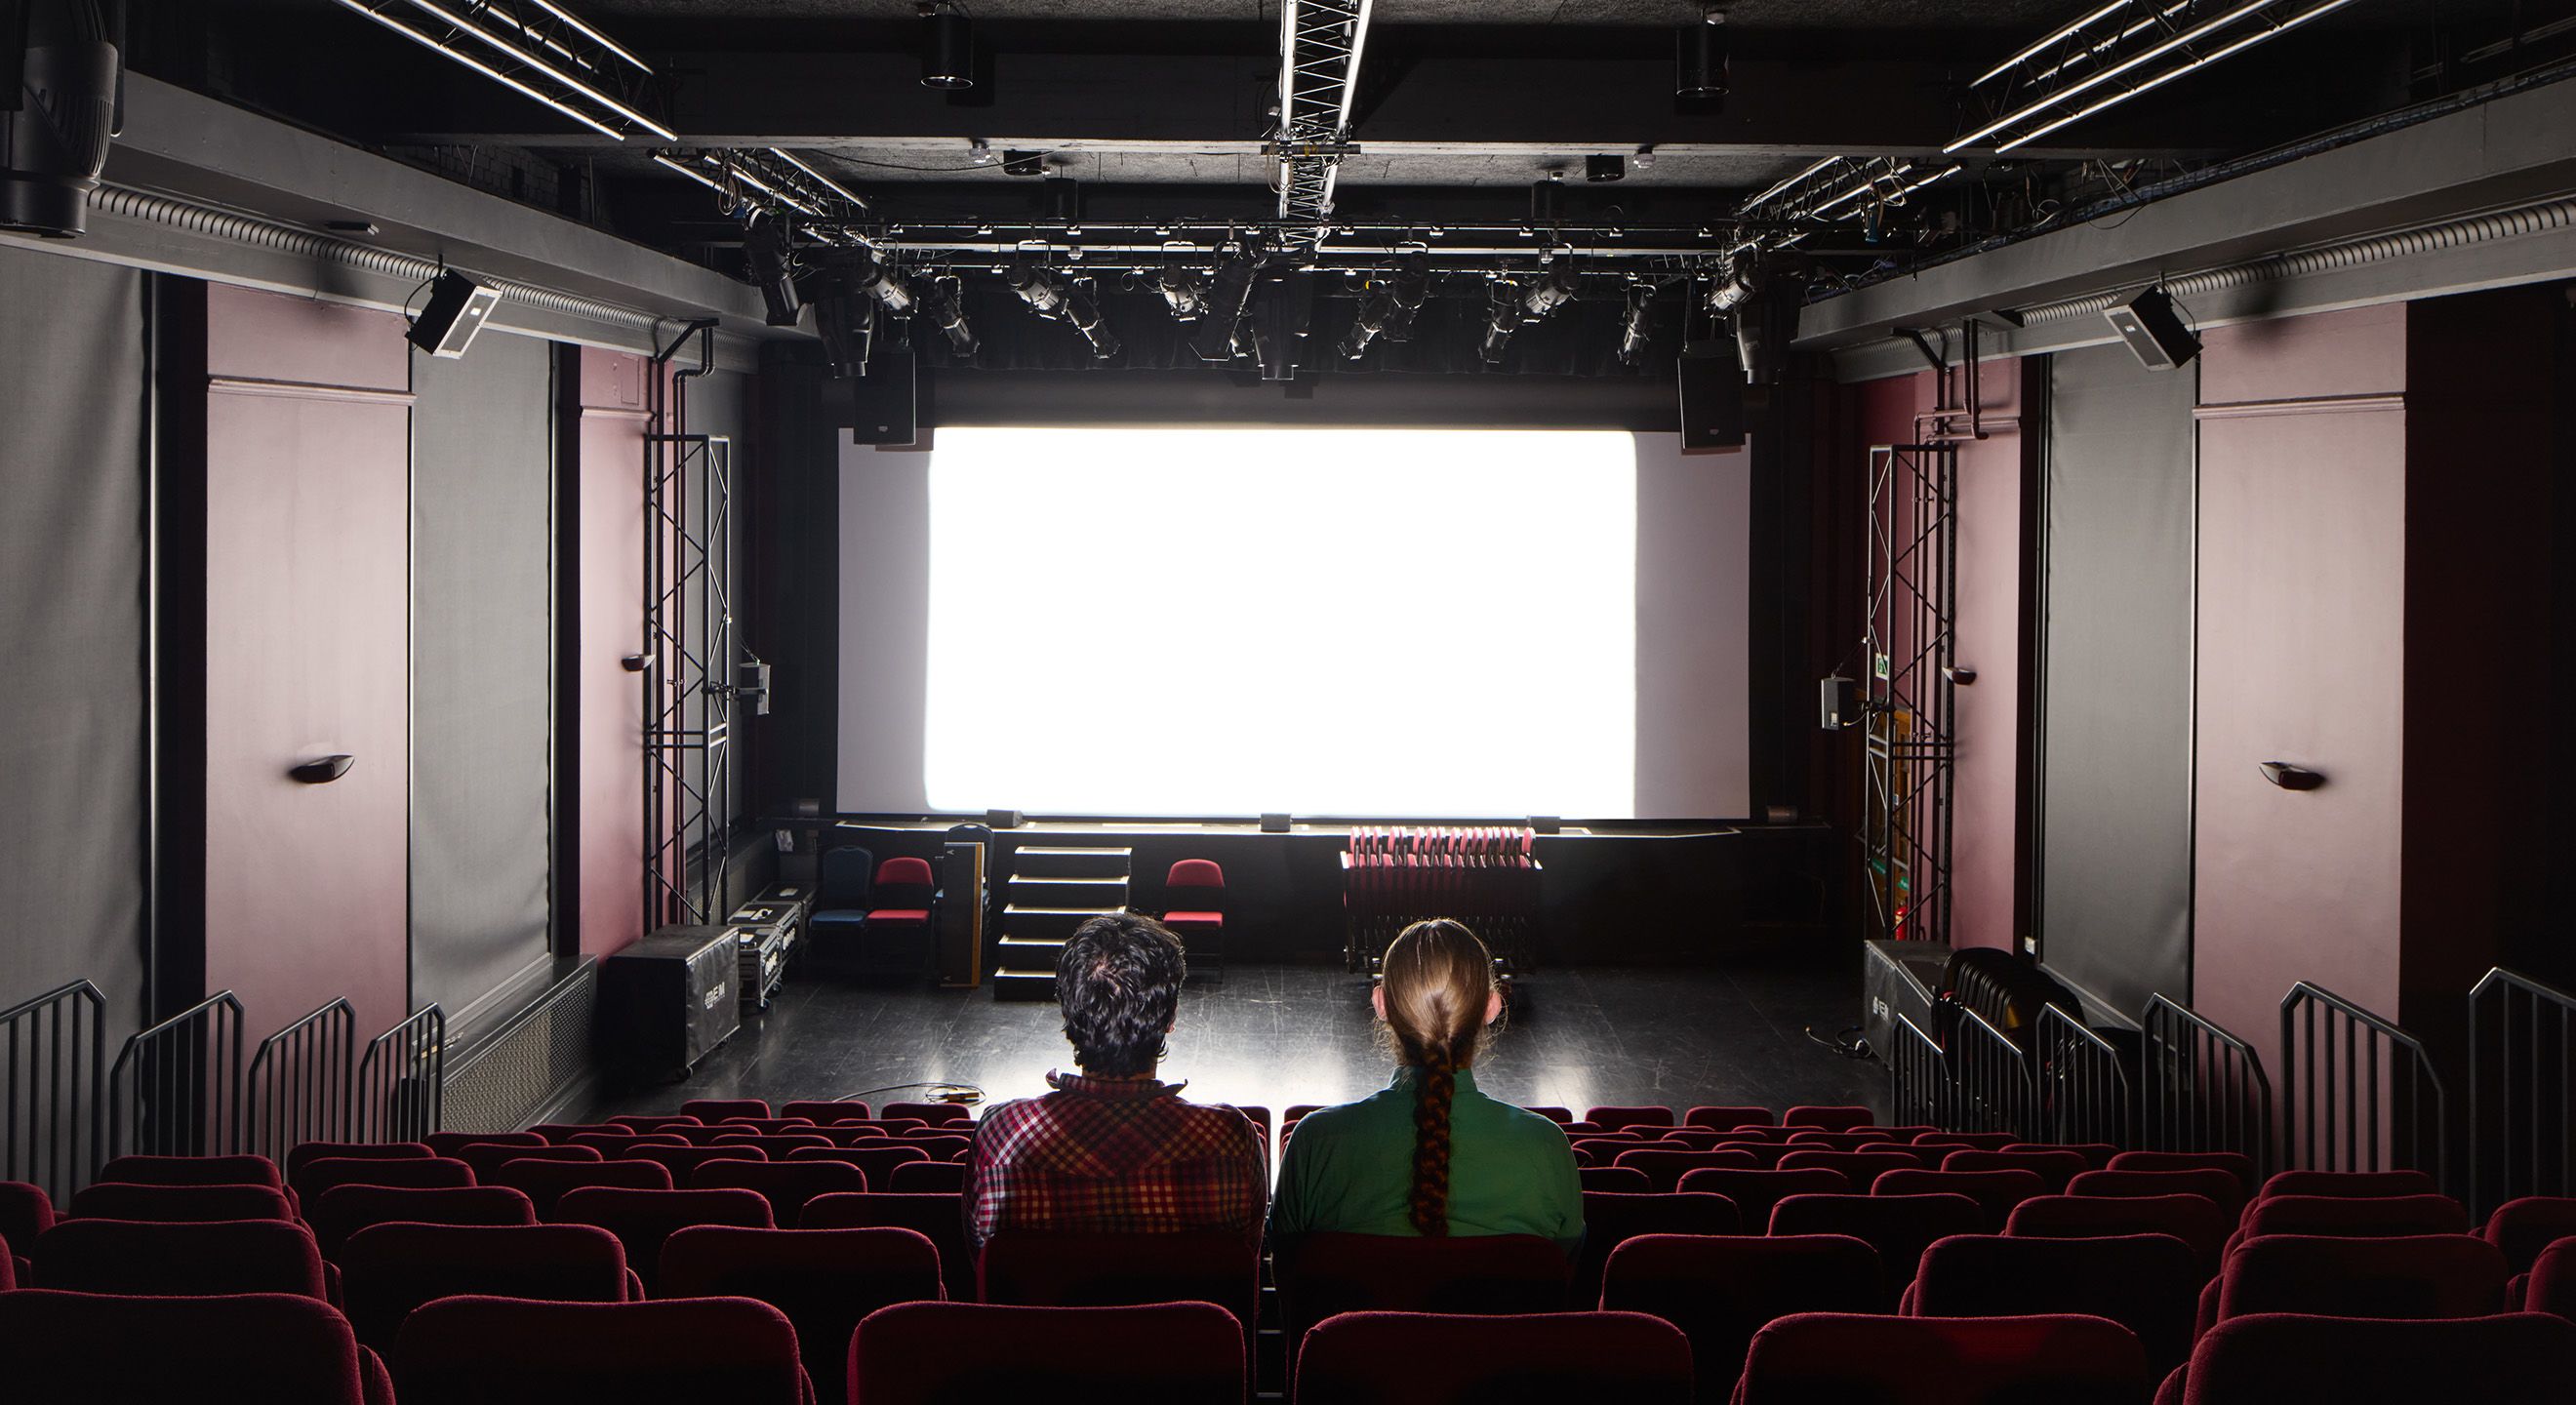 Two people sit in a dark room and look at the blank projector screen belonging to the Imperial Cinema Club